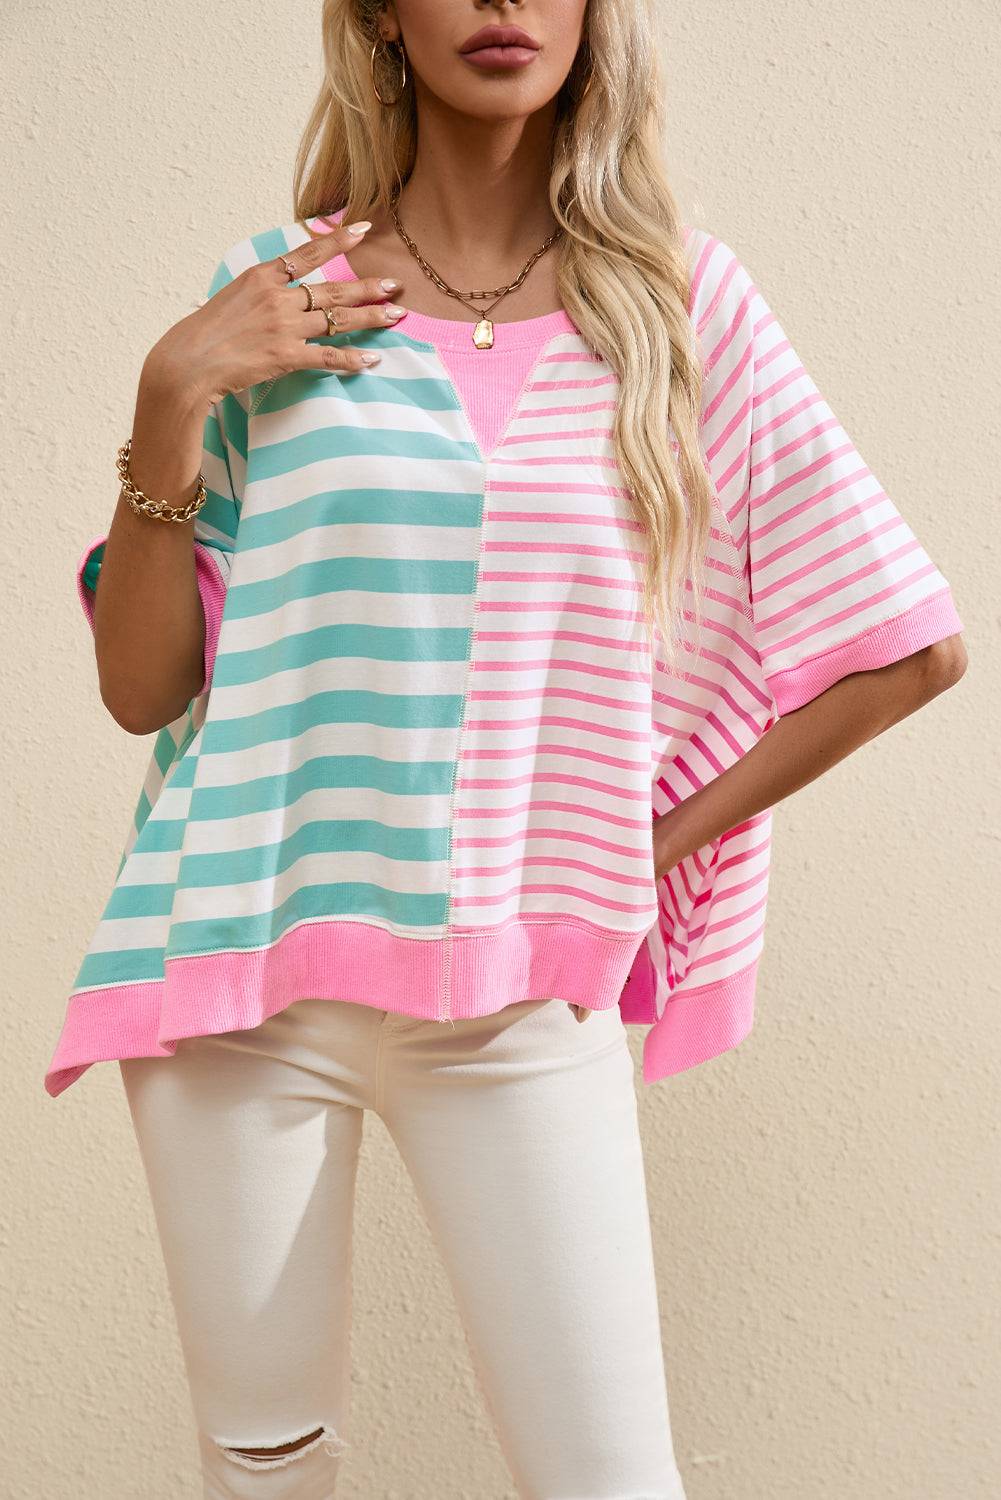 a woman wearing a pink and blue striped top